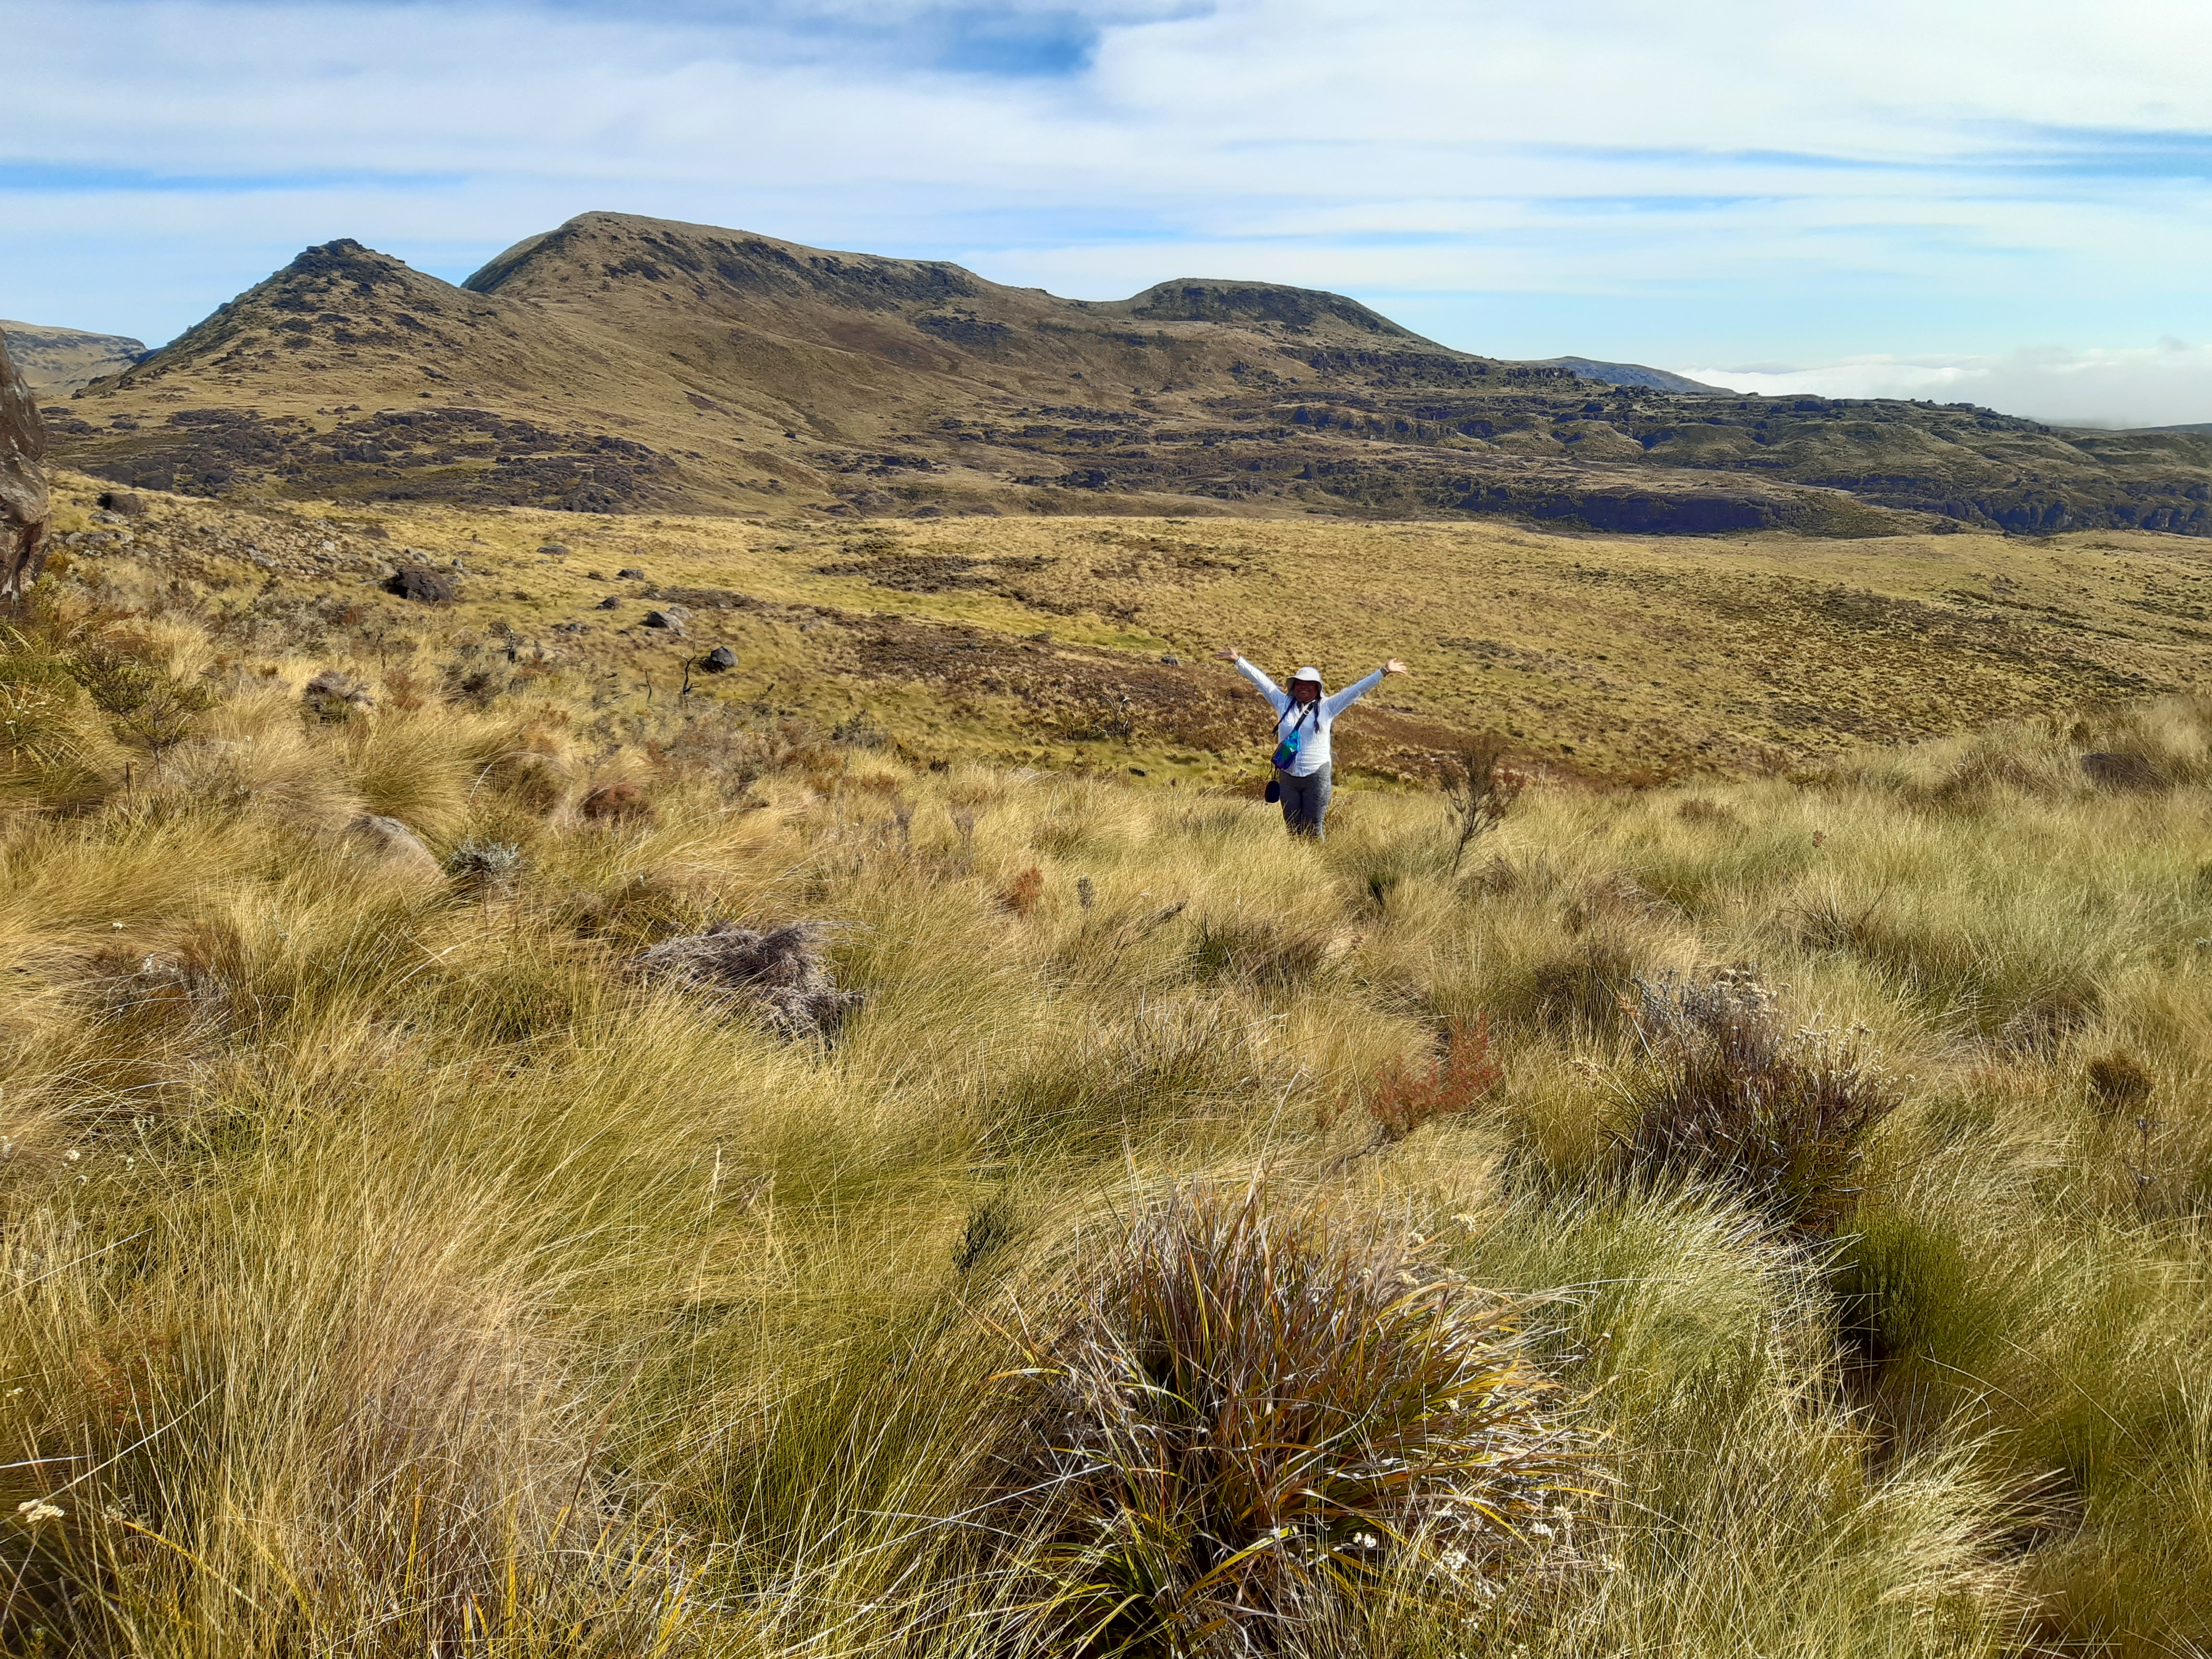 Kew MSc Student Diana Rabeharison is pictured in a vast open area of grassland. The shrubs here are so present and undulating that no single spot of flat ground is visible. 